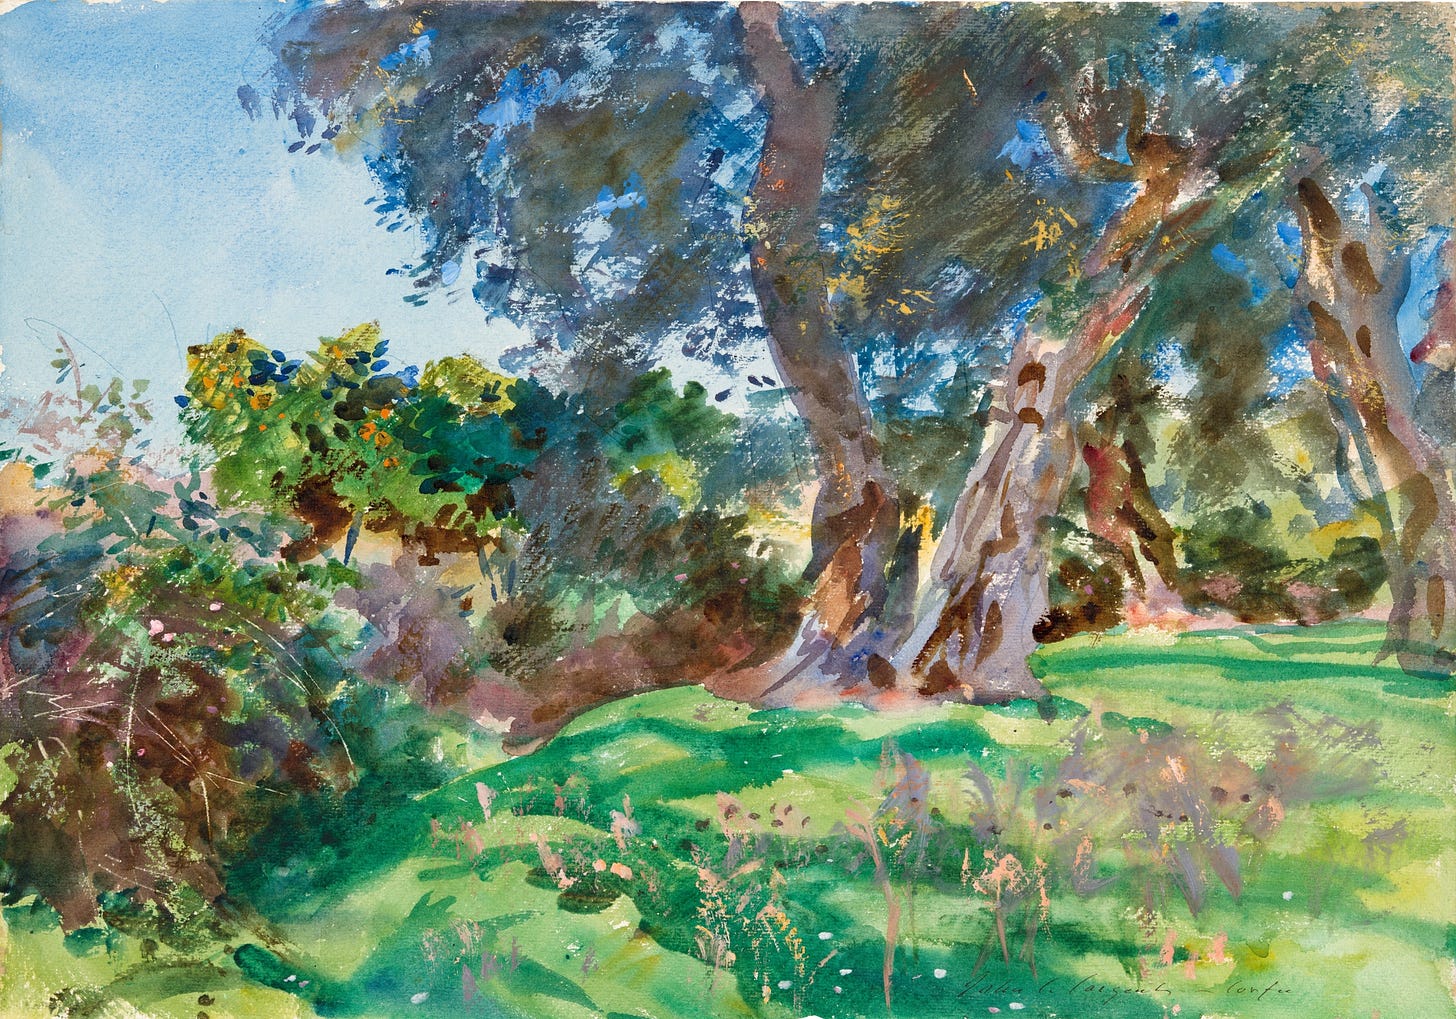 Watercolor painting of a sunny, verdant landscape filled with towering trees, shrubs, and brightly colored flowers